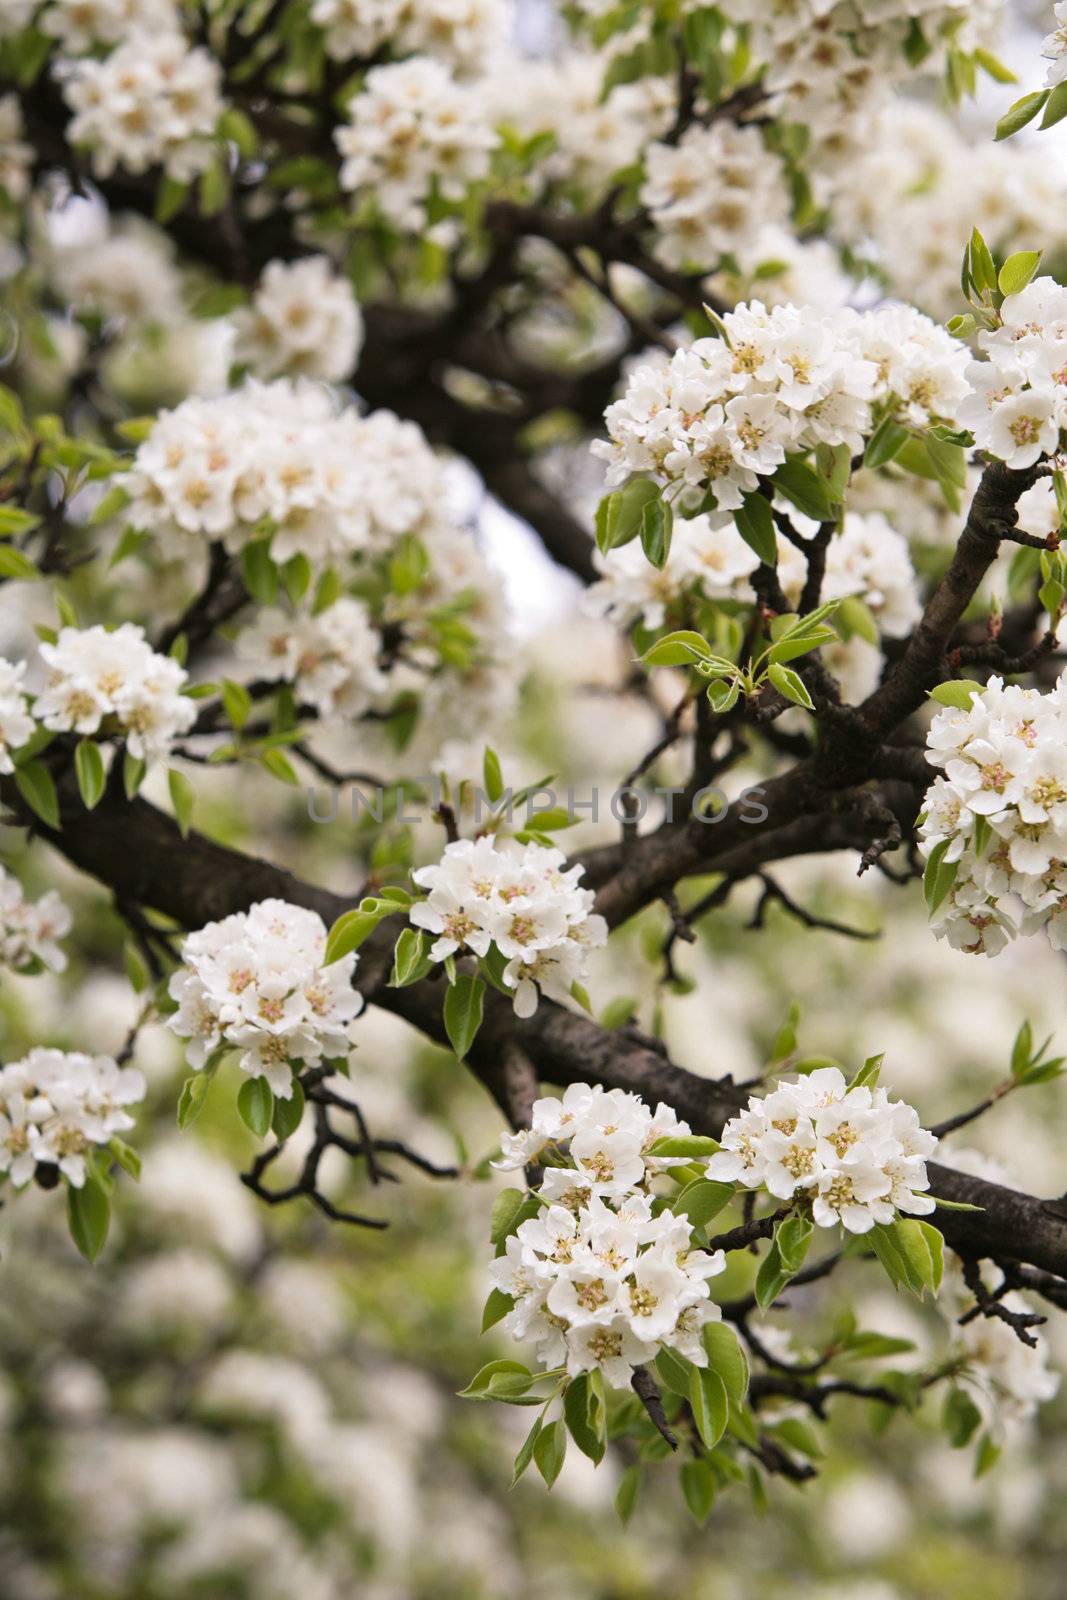 nature series: pear are blooming in spring season